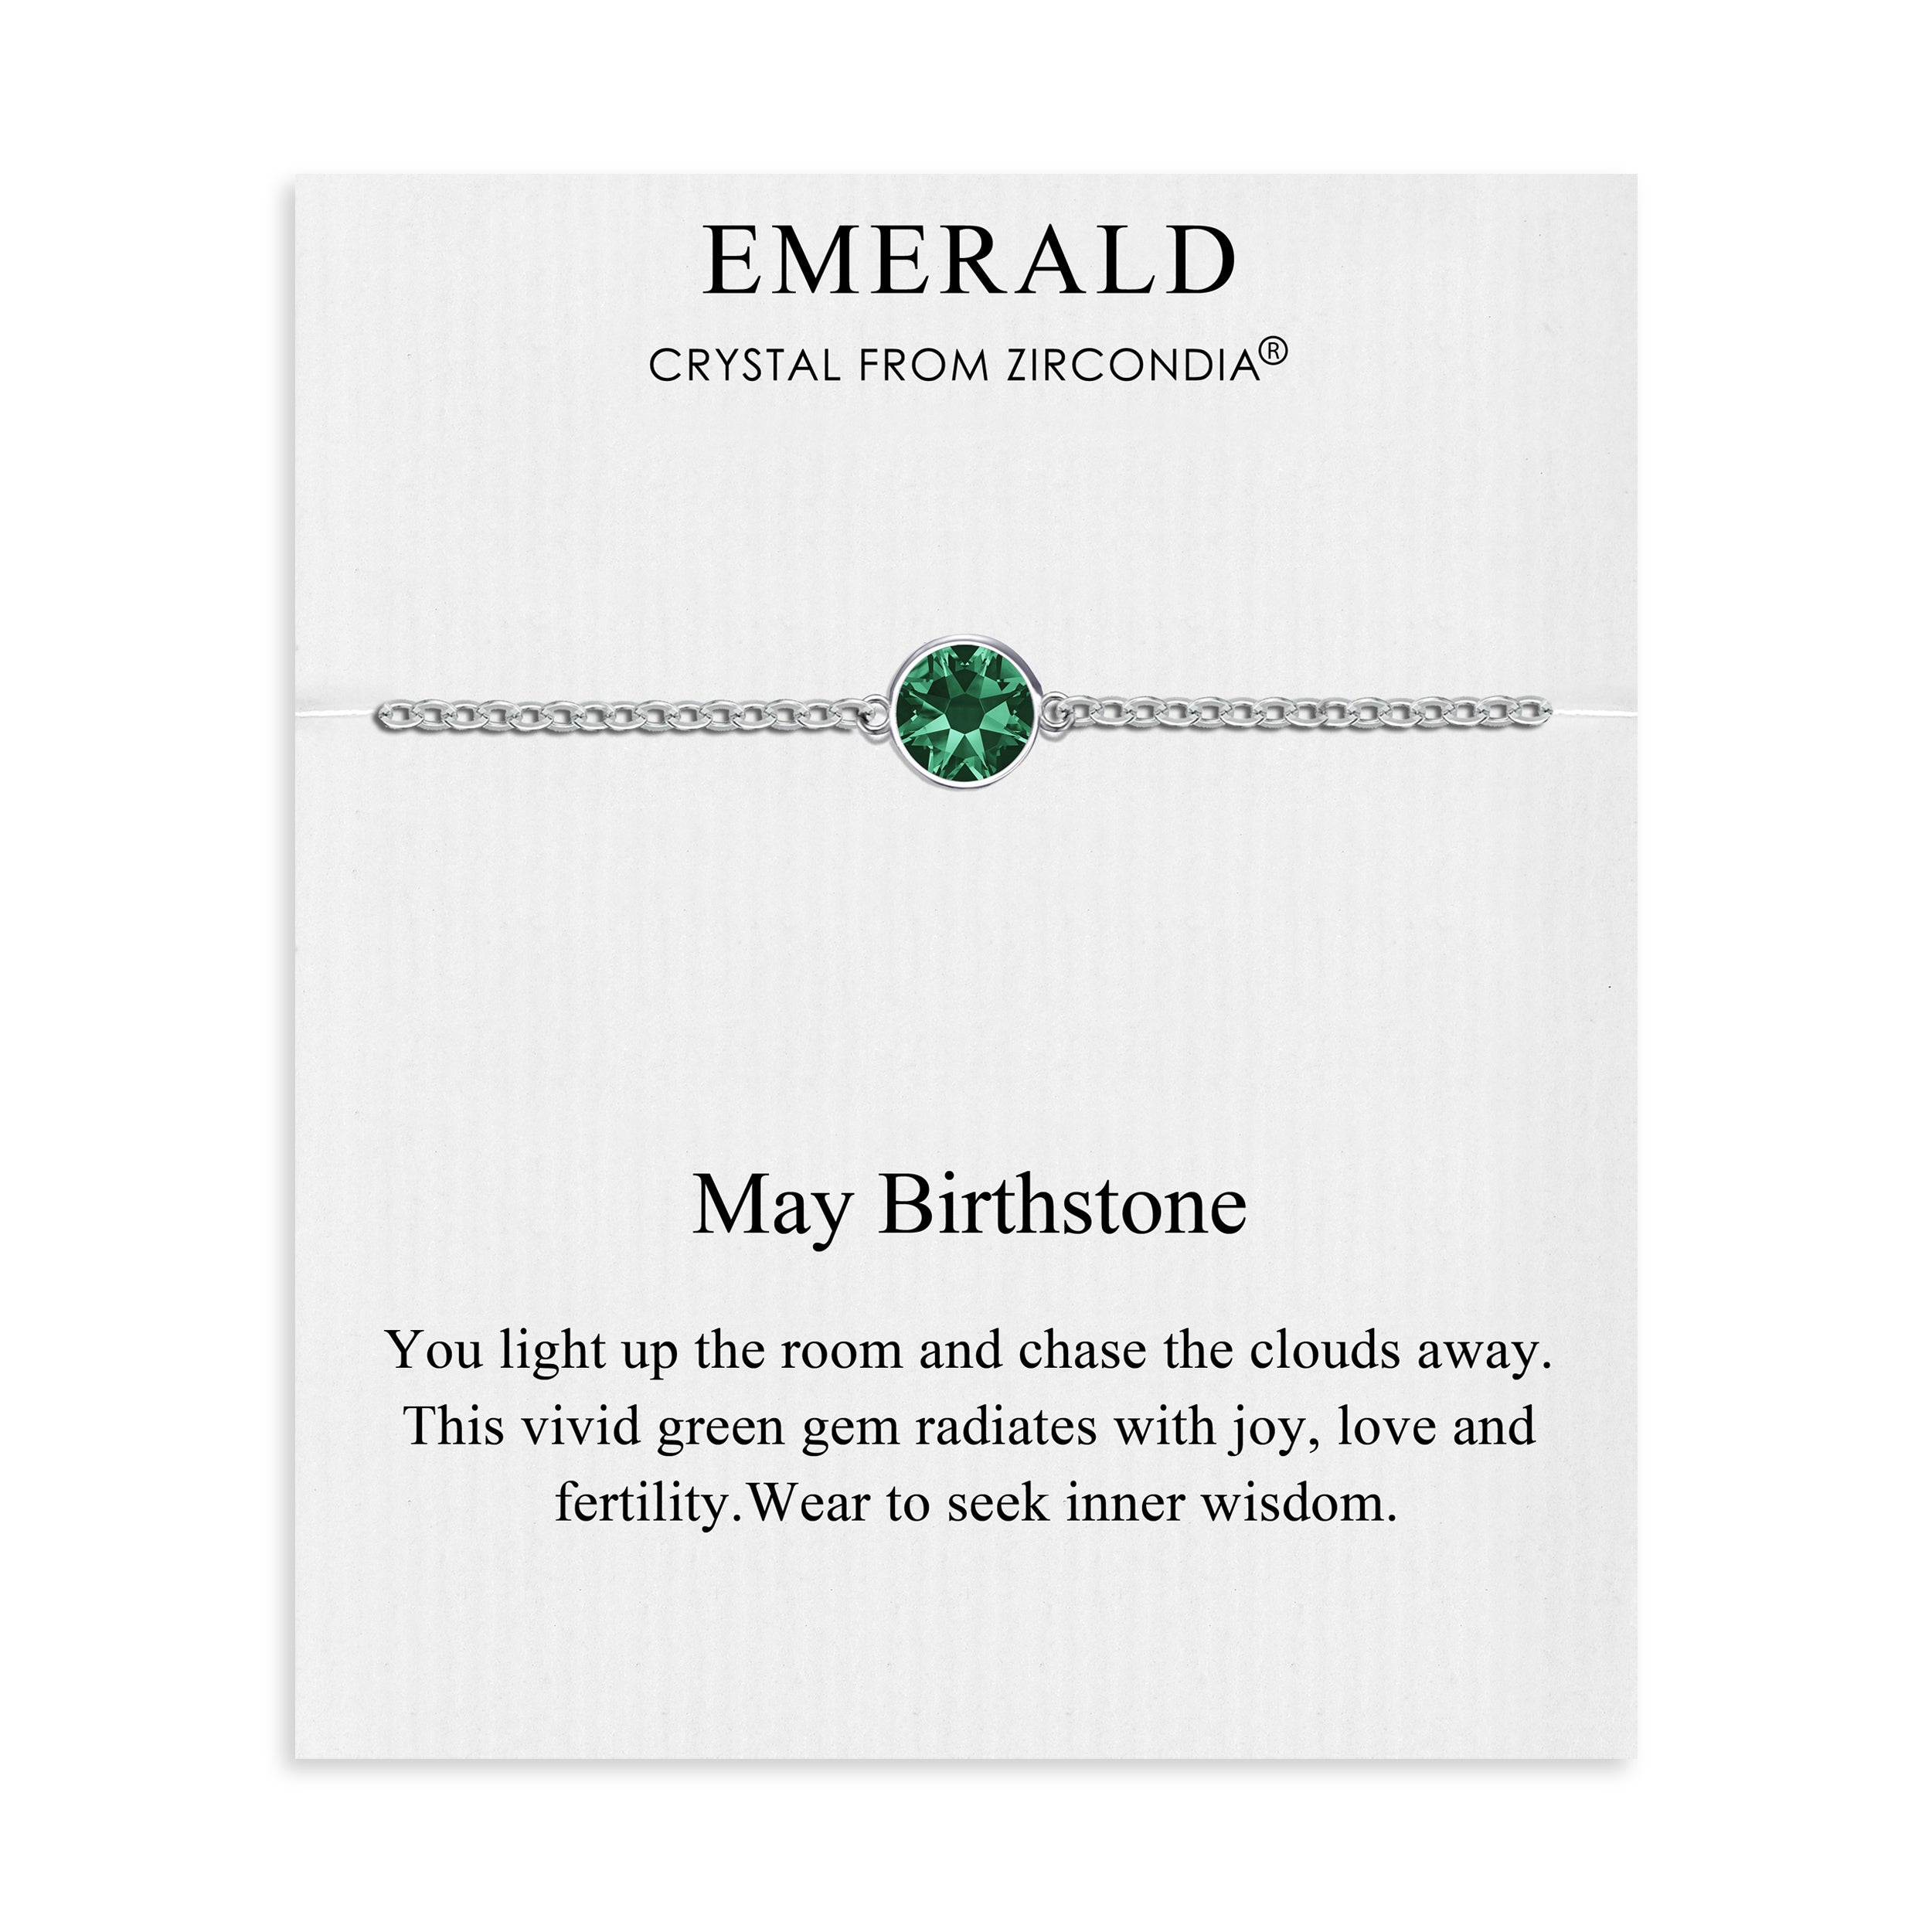 May (Emerald) Birthstone Anklet Created with Zircondia® Crystals by Philip Jones Jewellery